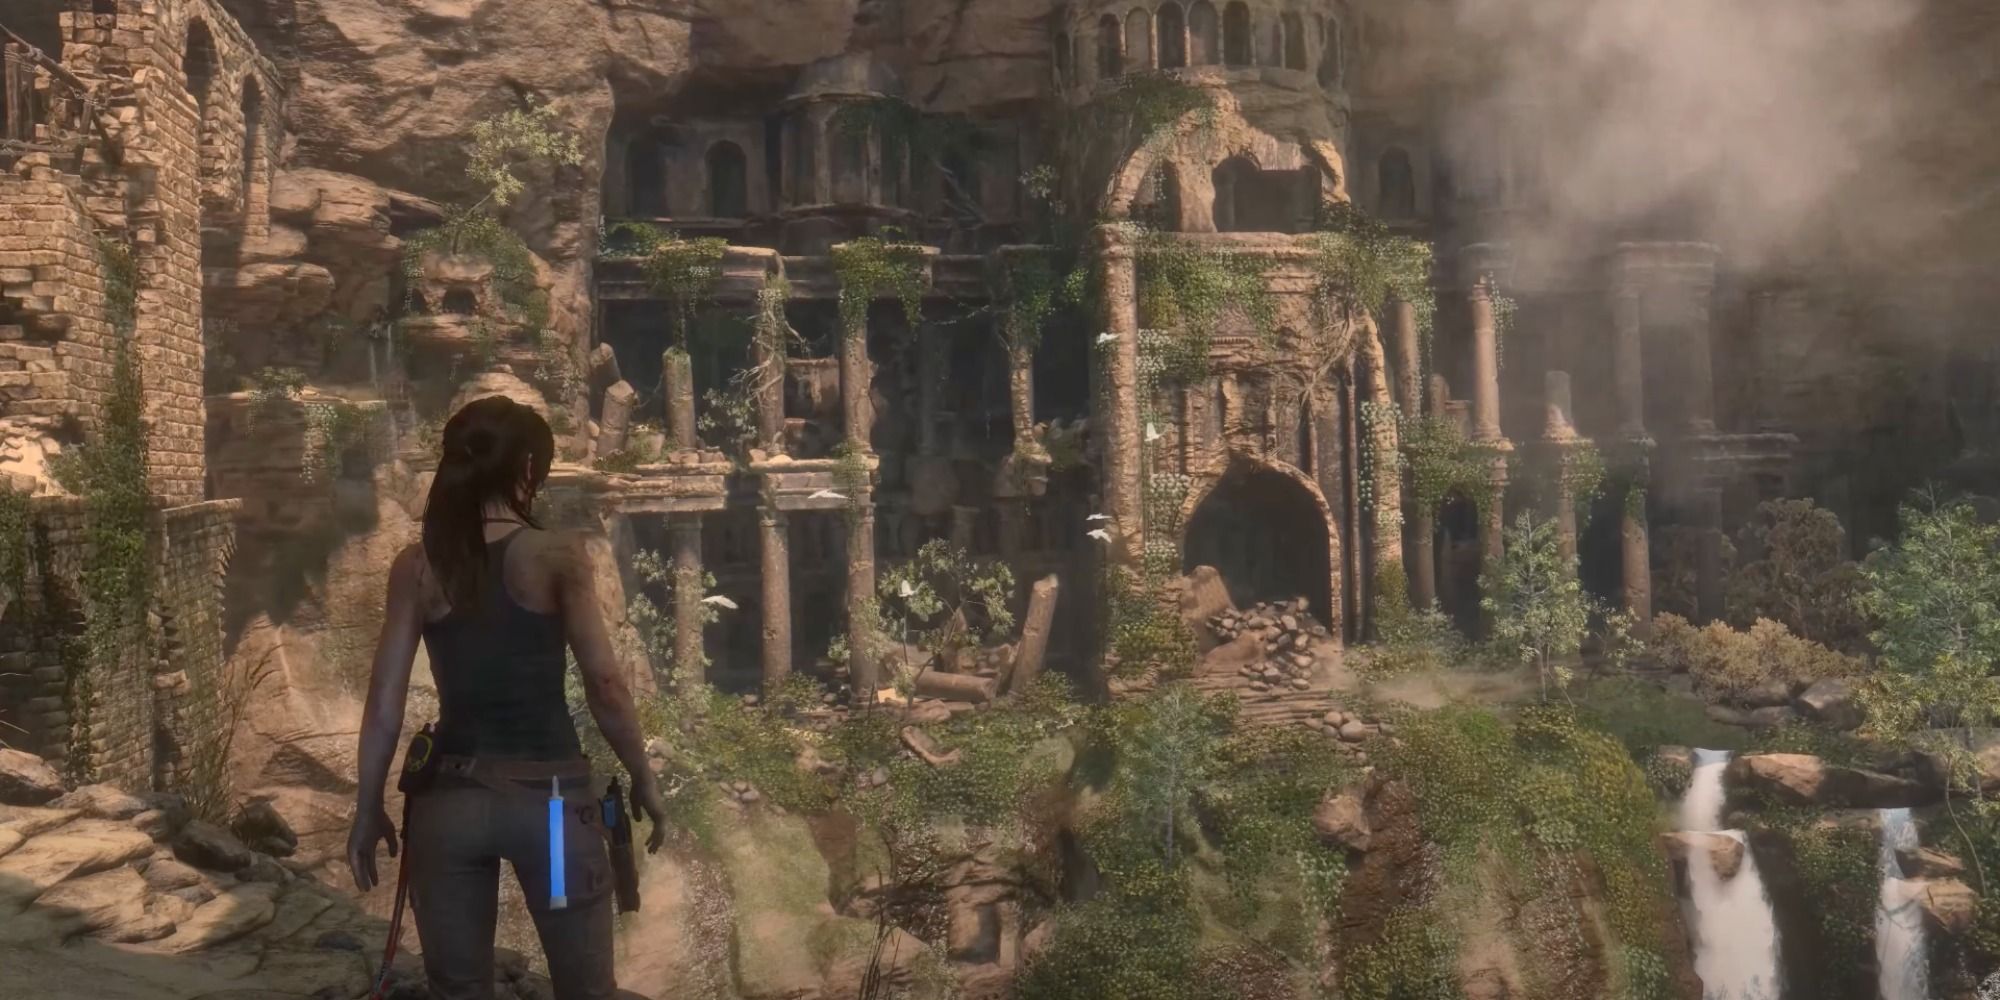 Lara Croft uncovers ruins in Syria in Rise of the Tomb Raider